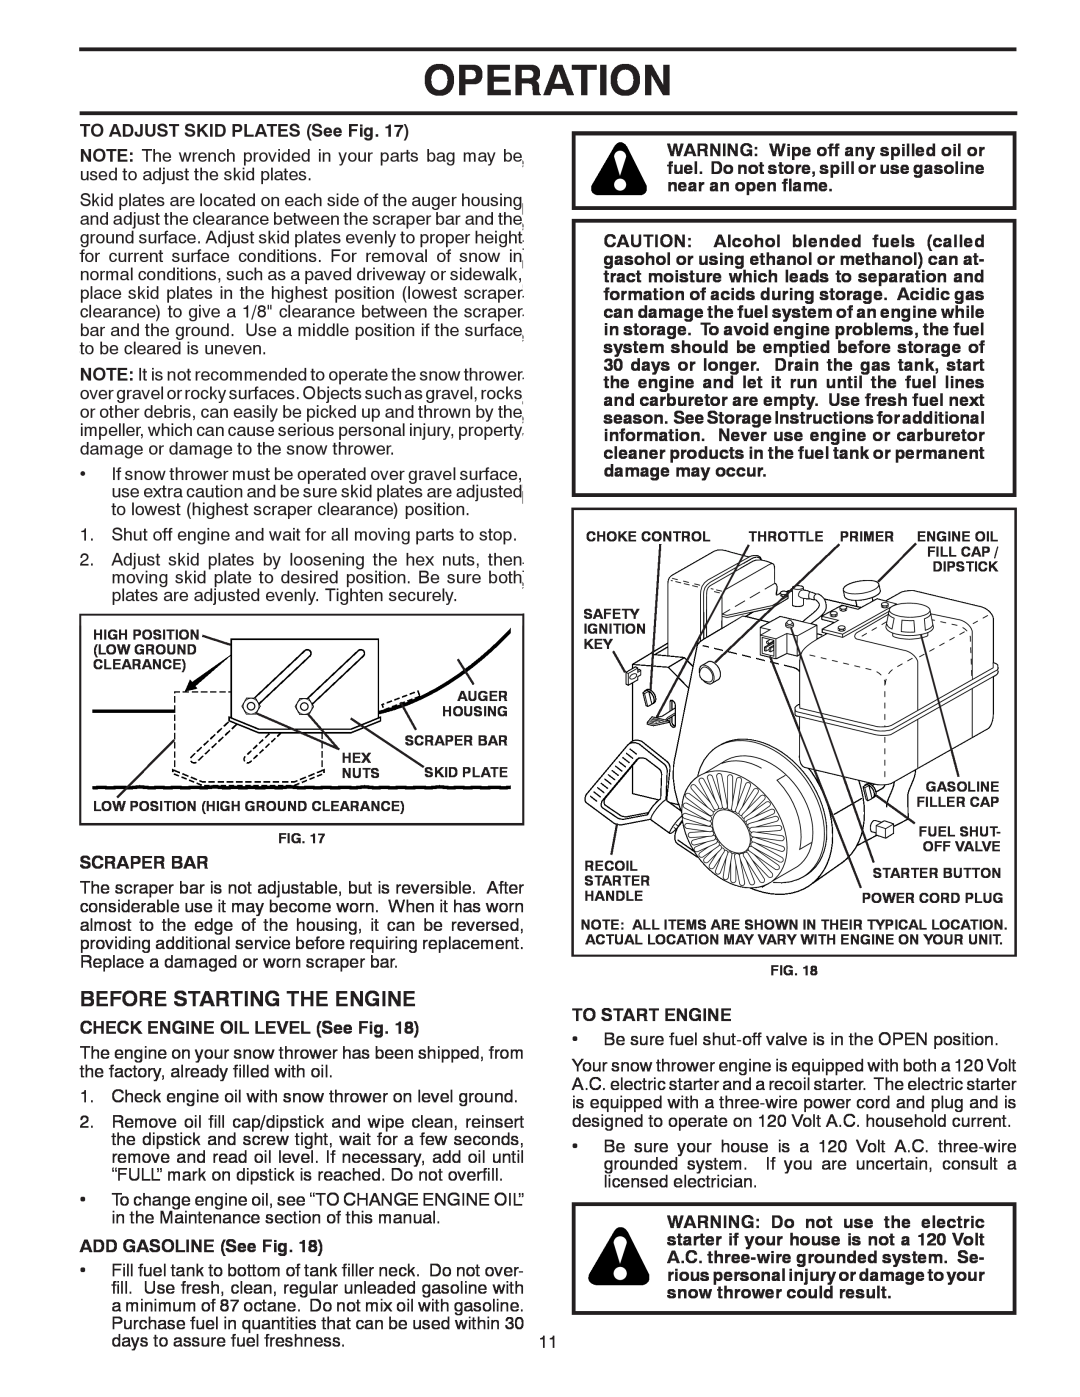 Poulan 96192001800 Operation, Before Starting The Engine, TO ADJUST SKID PLATES See Fig, Scraper Bar, ADD GASOLINE See Fig 